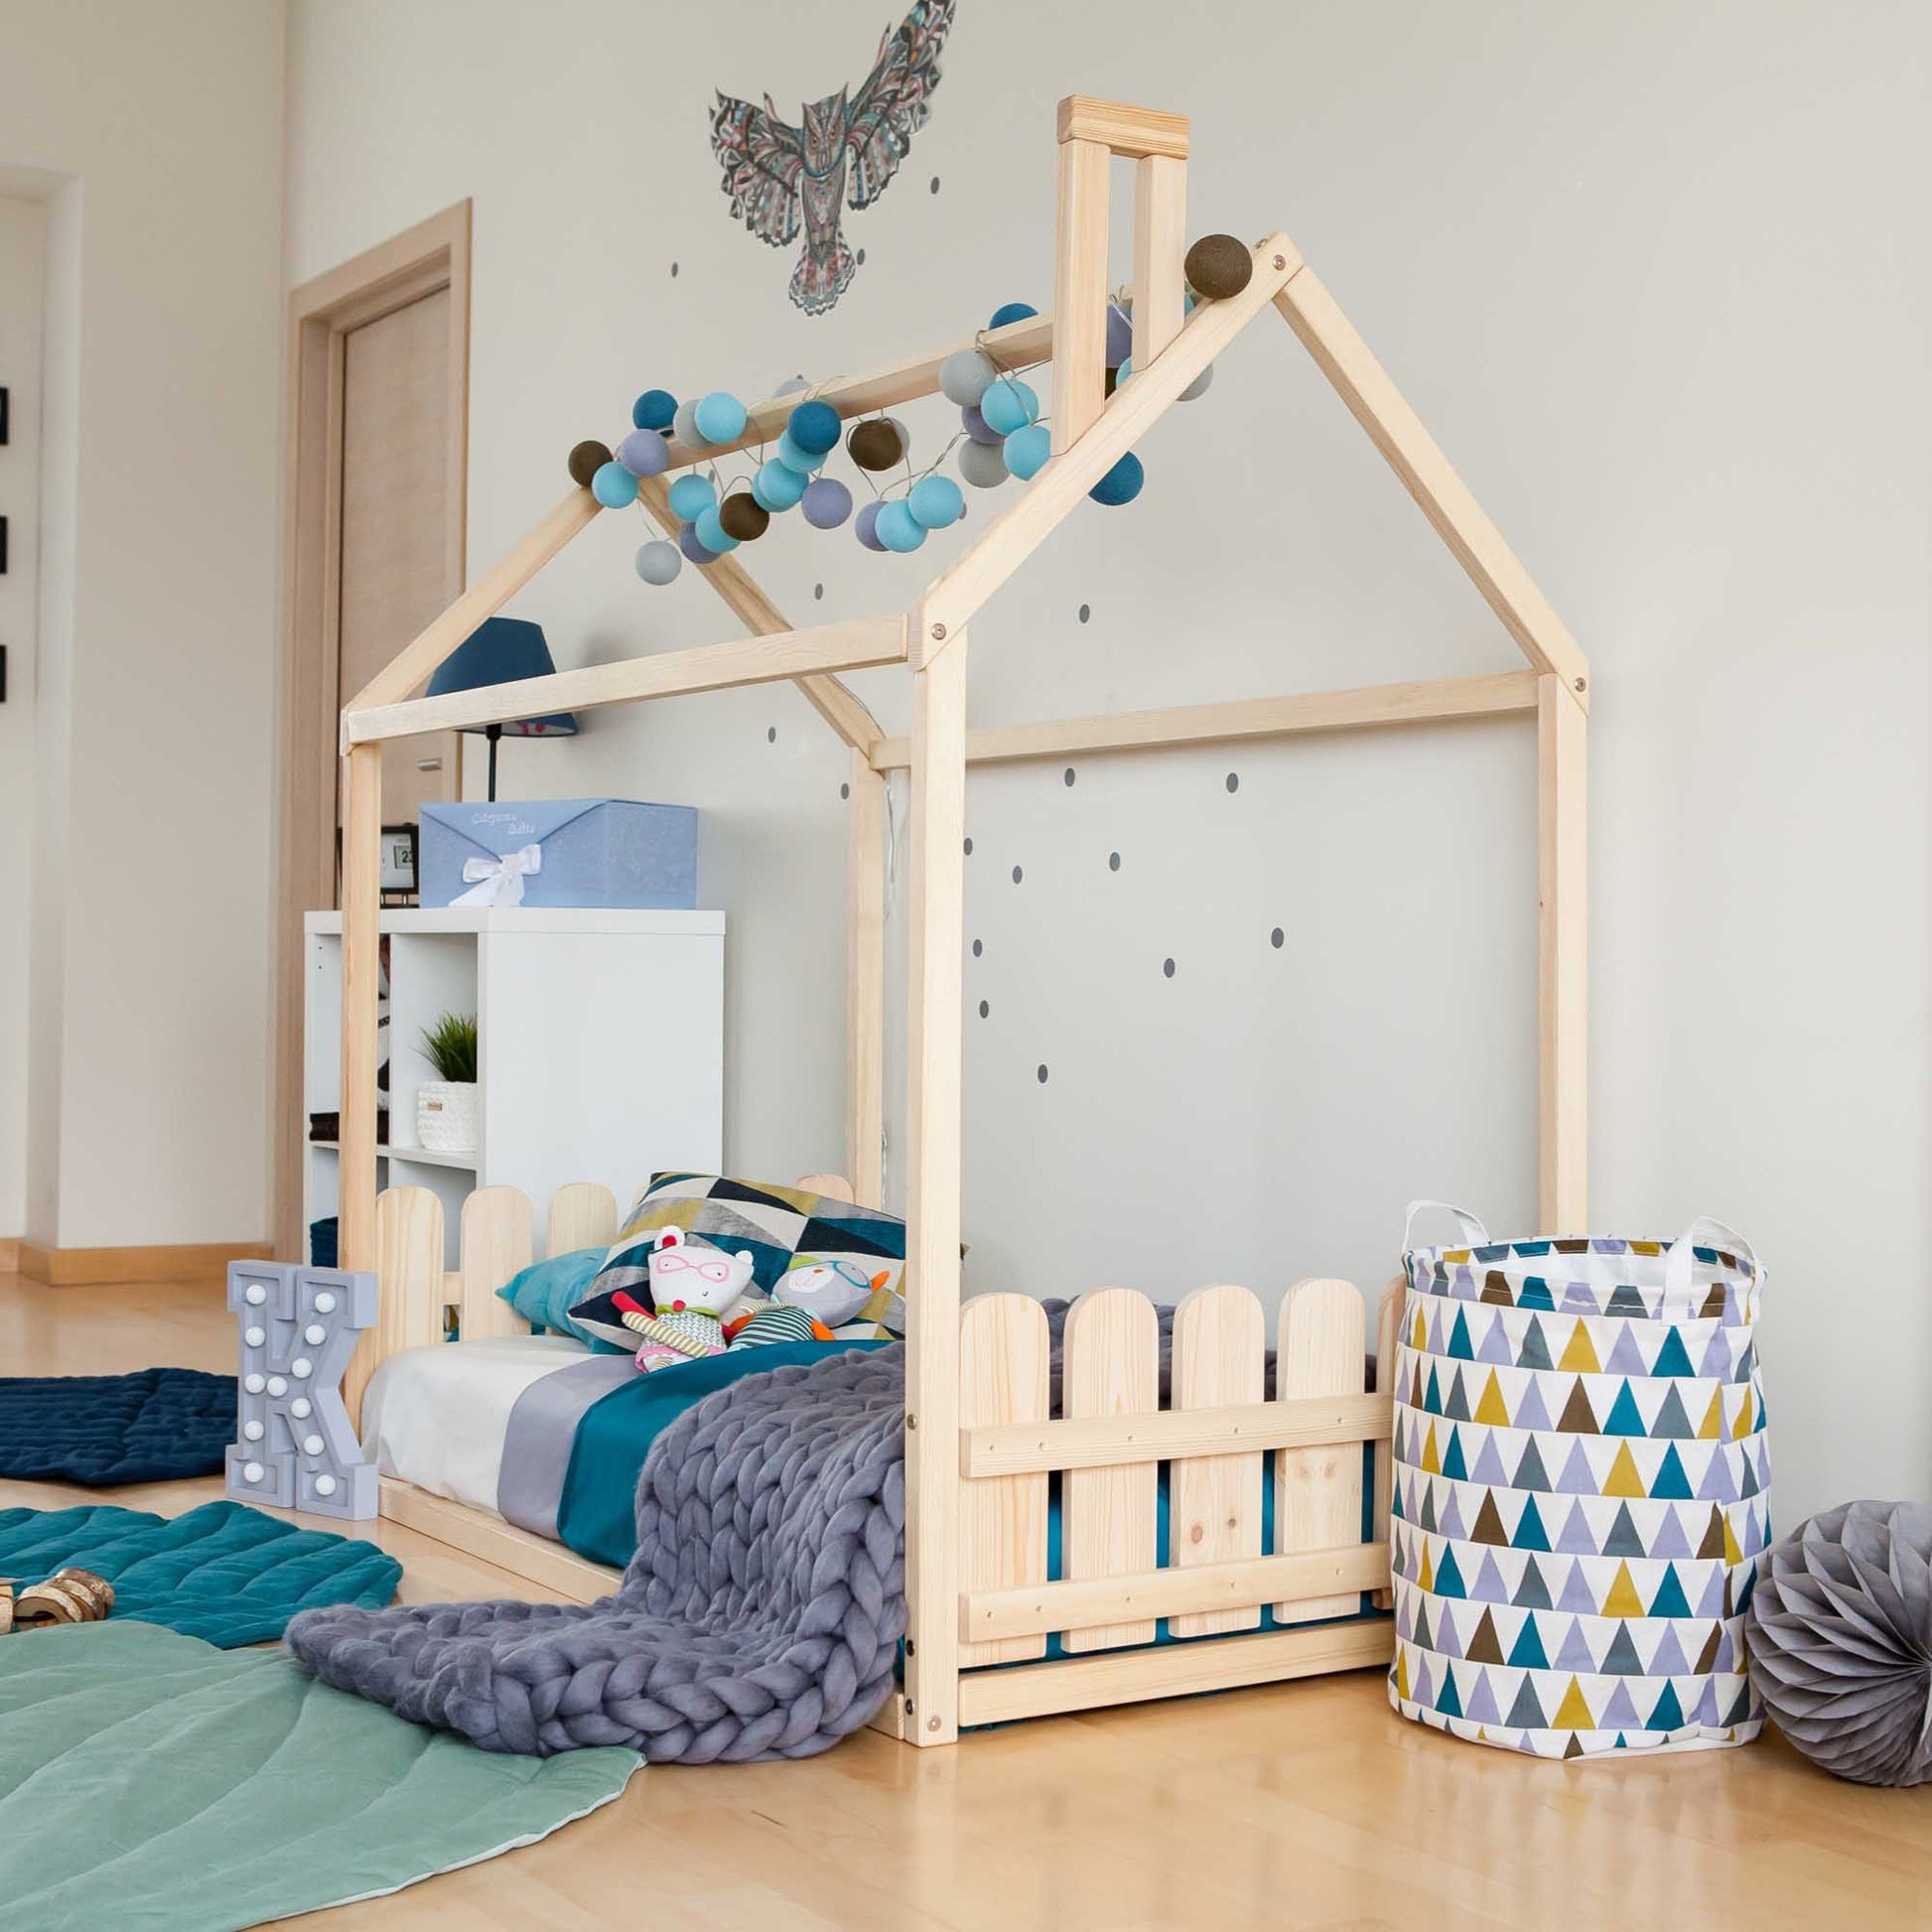 A child's bedroom with a Montessori house-frame bed with a picket fence headboard and footboard.